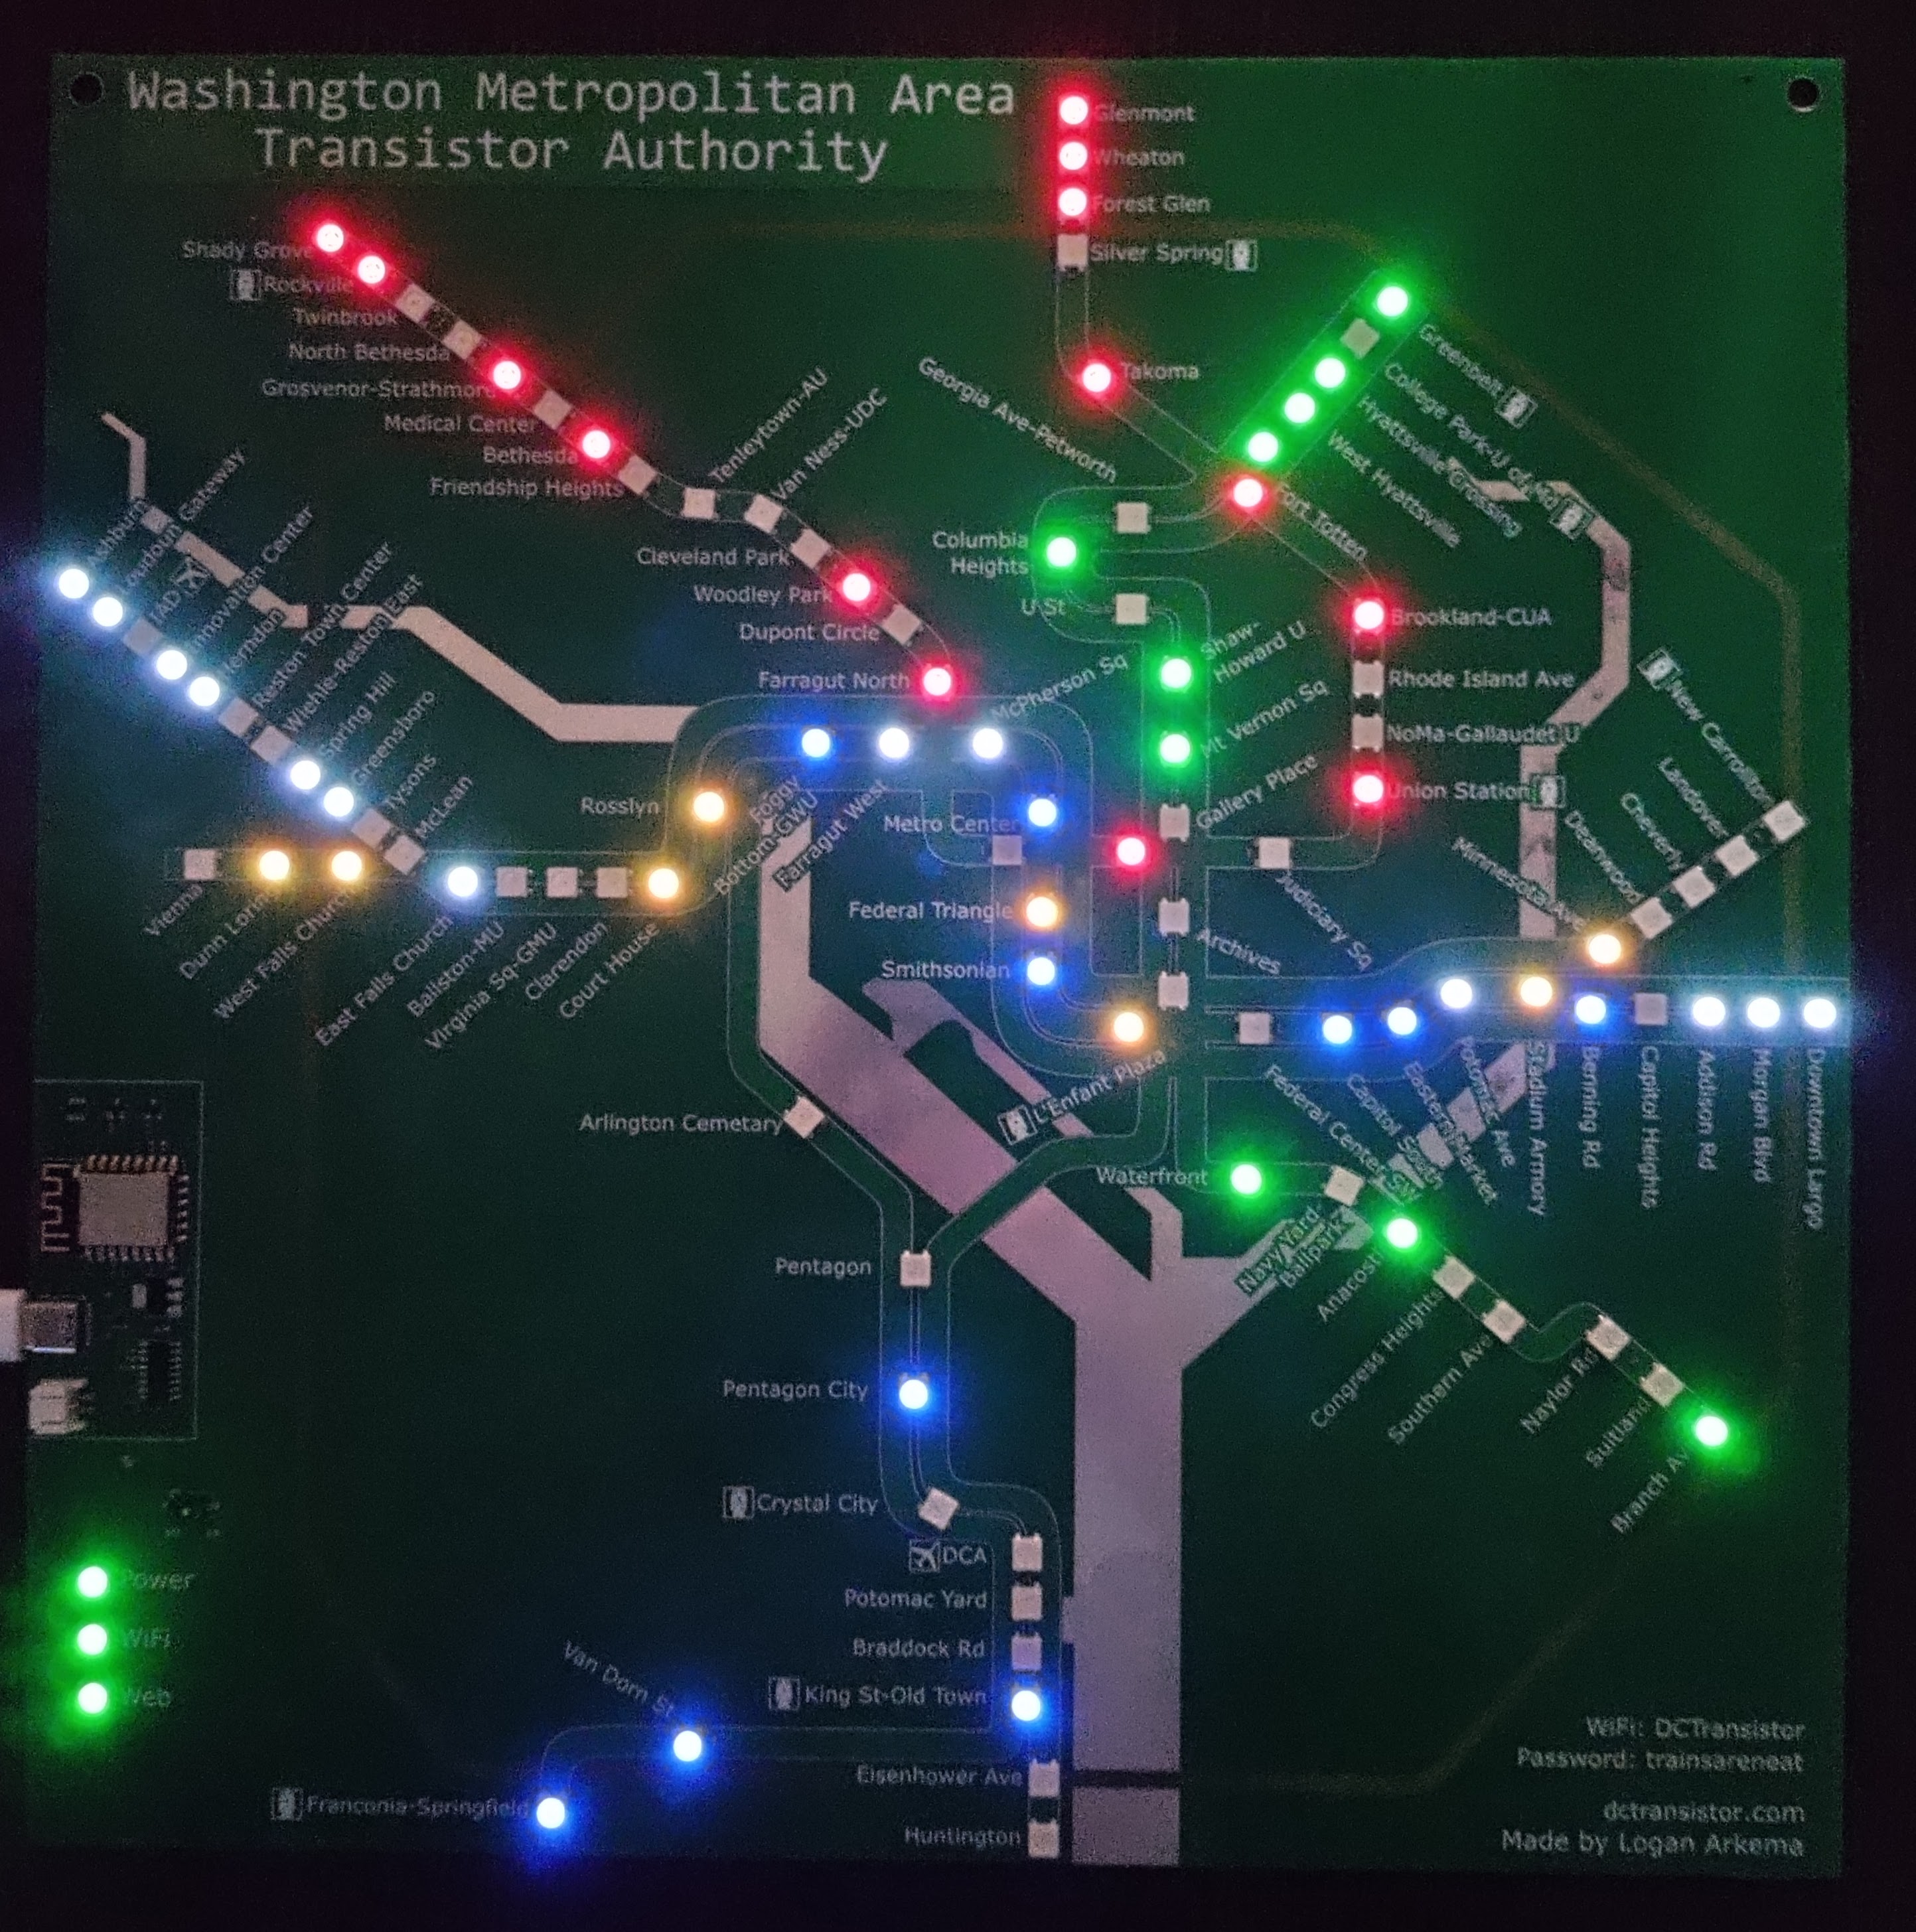 Standard DCTransistor Board turned on and showing live train positions using a single LED at each station. LEDs are lit up to match the color of the train line.